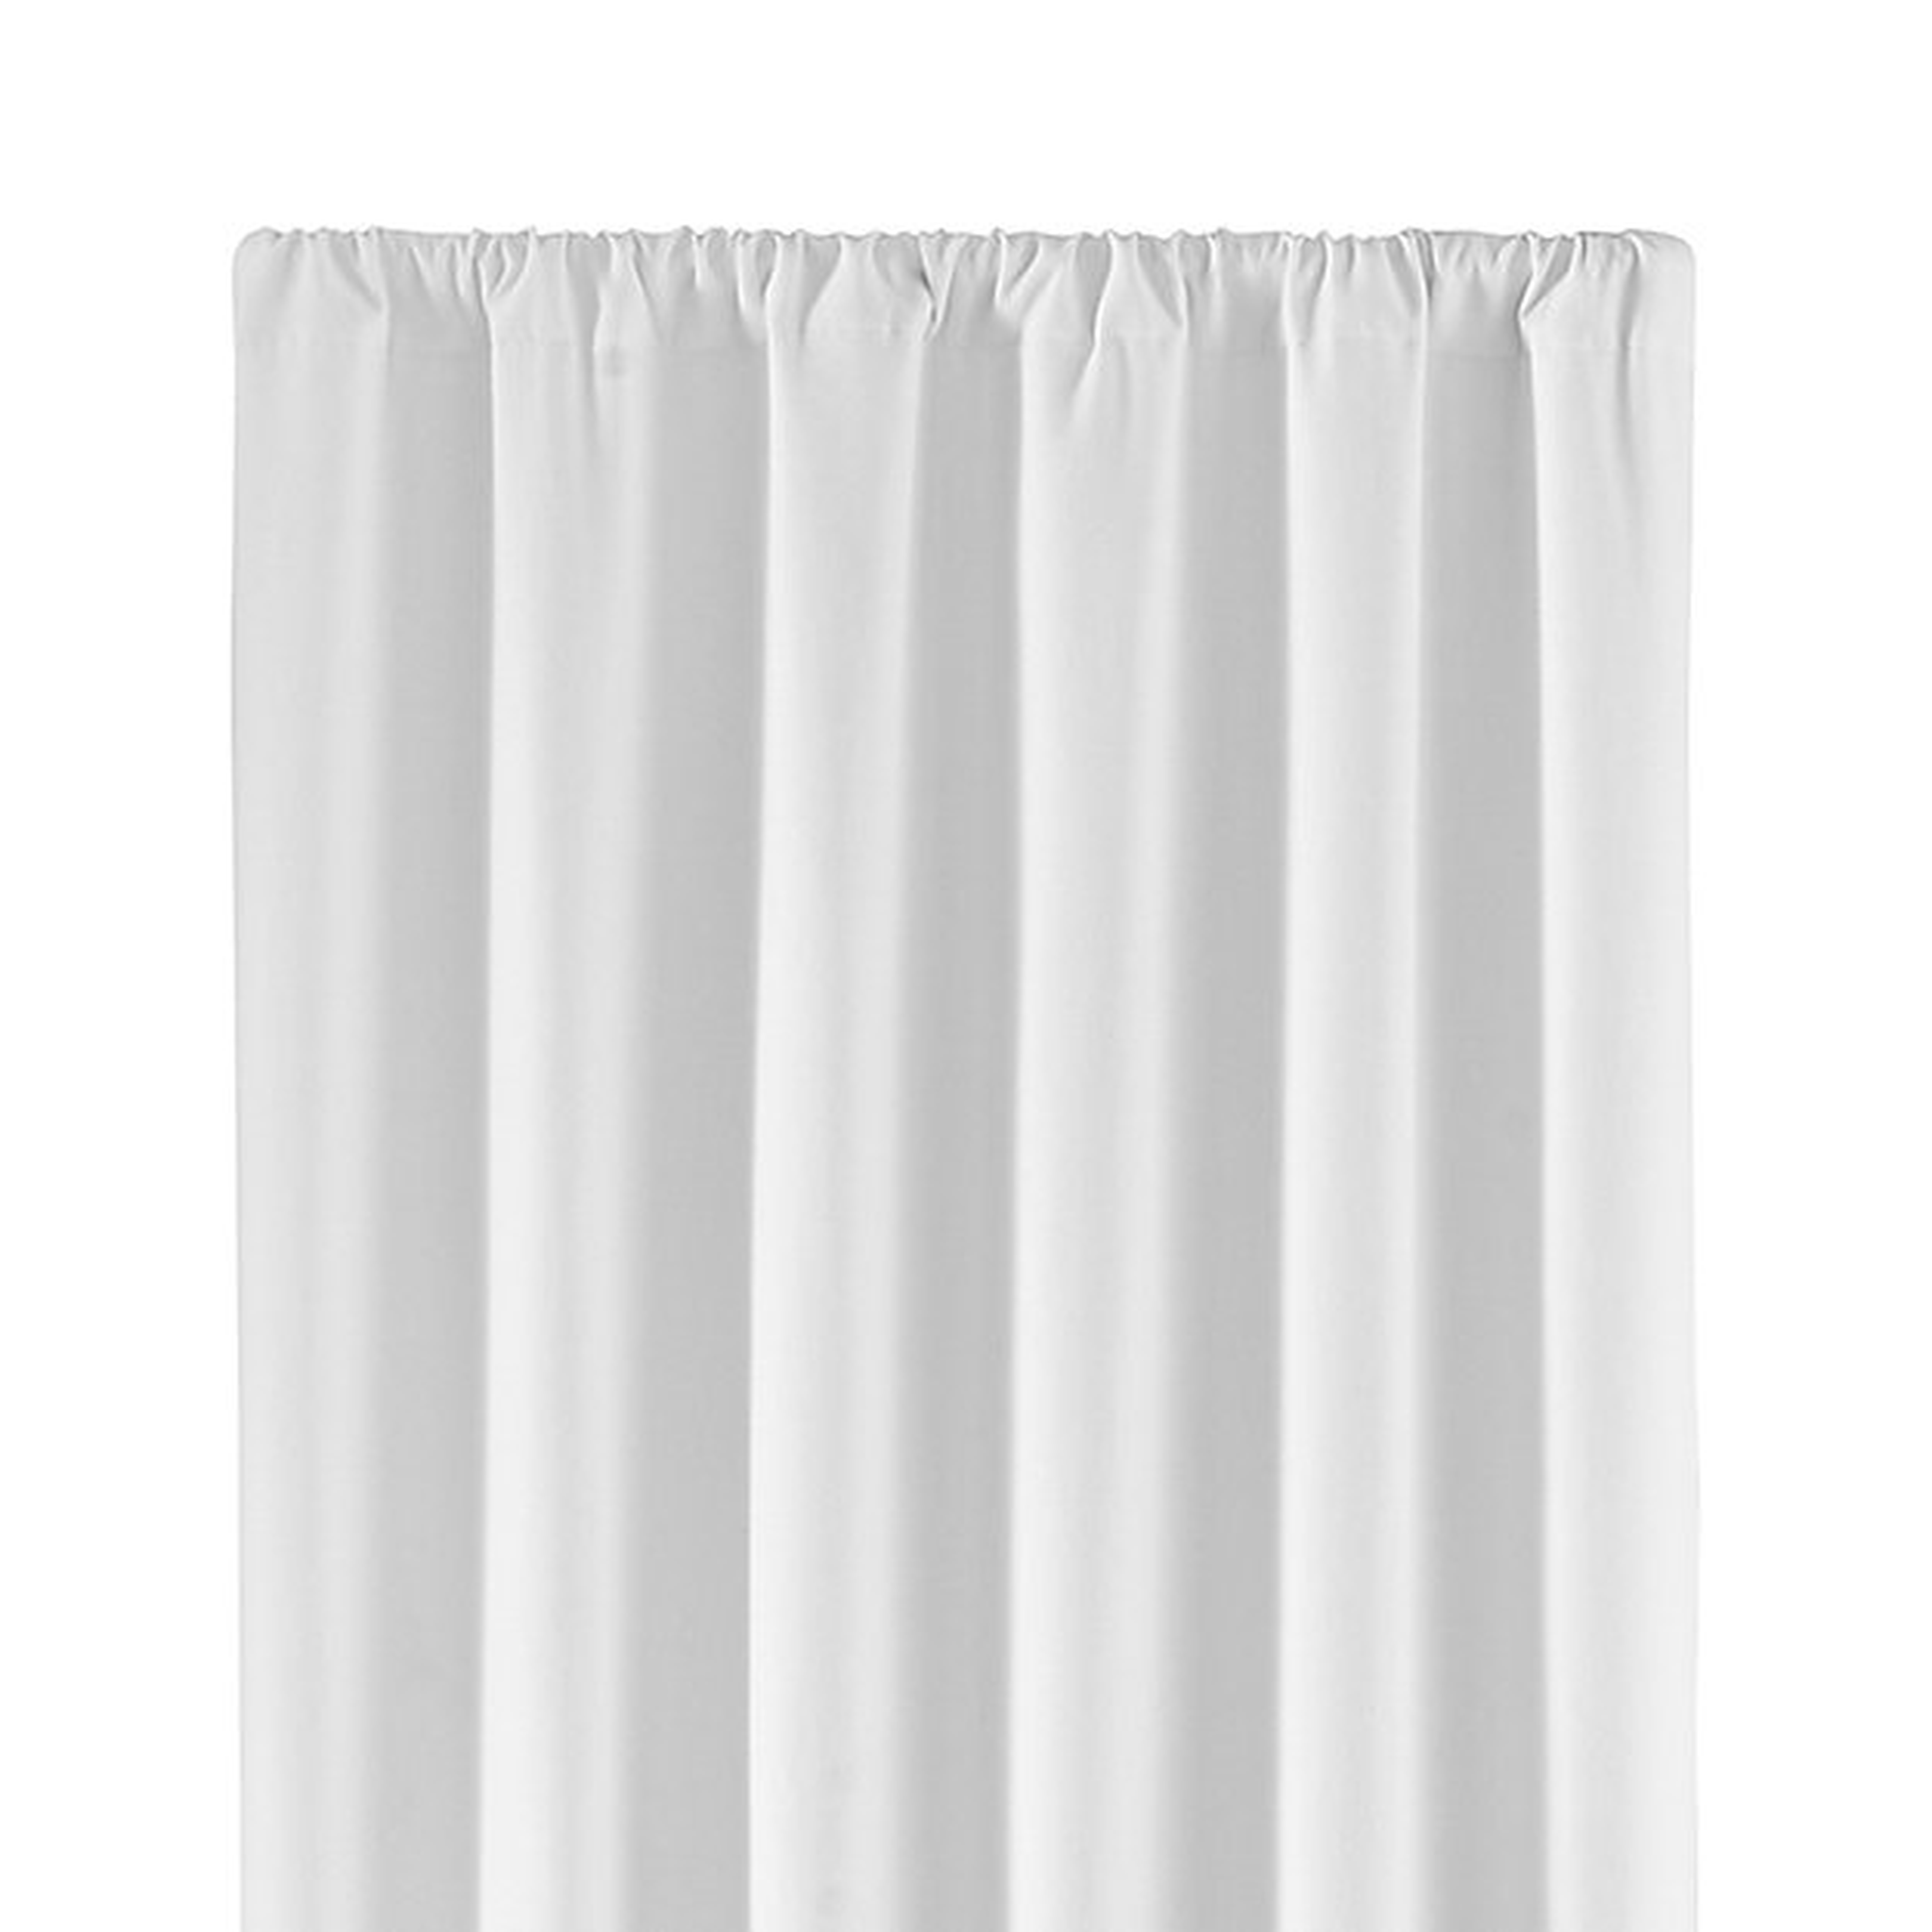 Wallace White 52"x96" Blackout Curtain Panel - Crate and Barrel